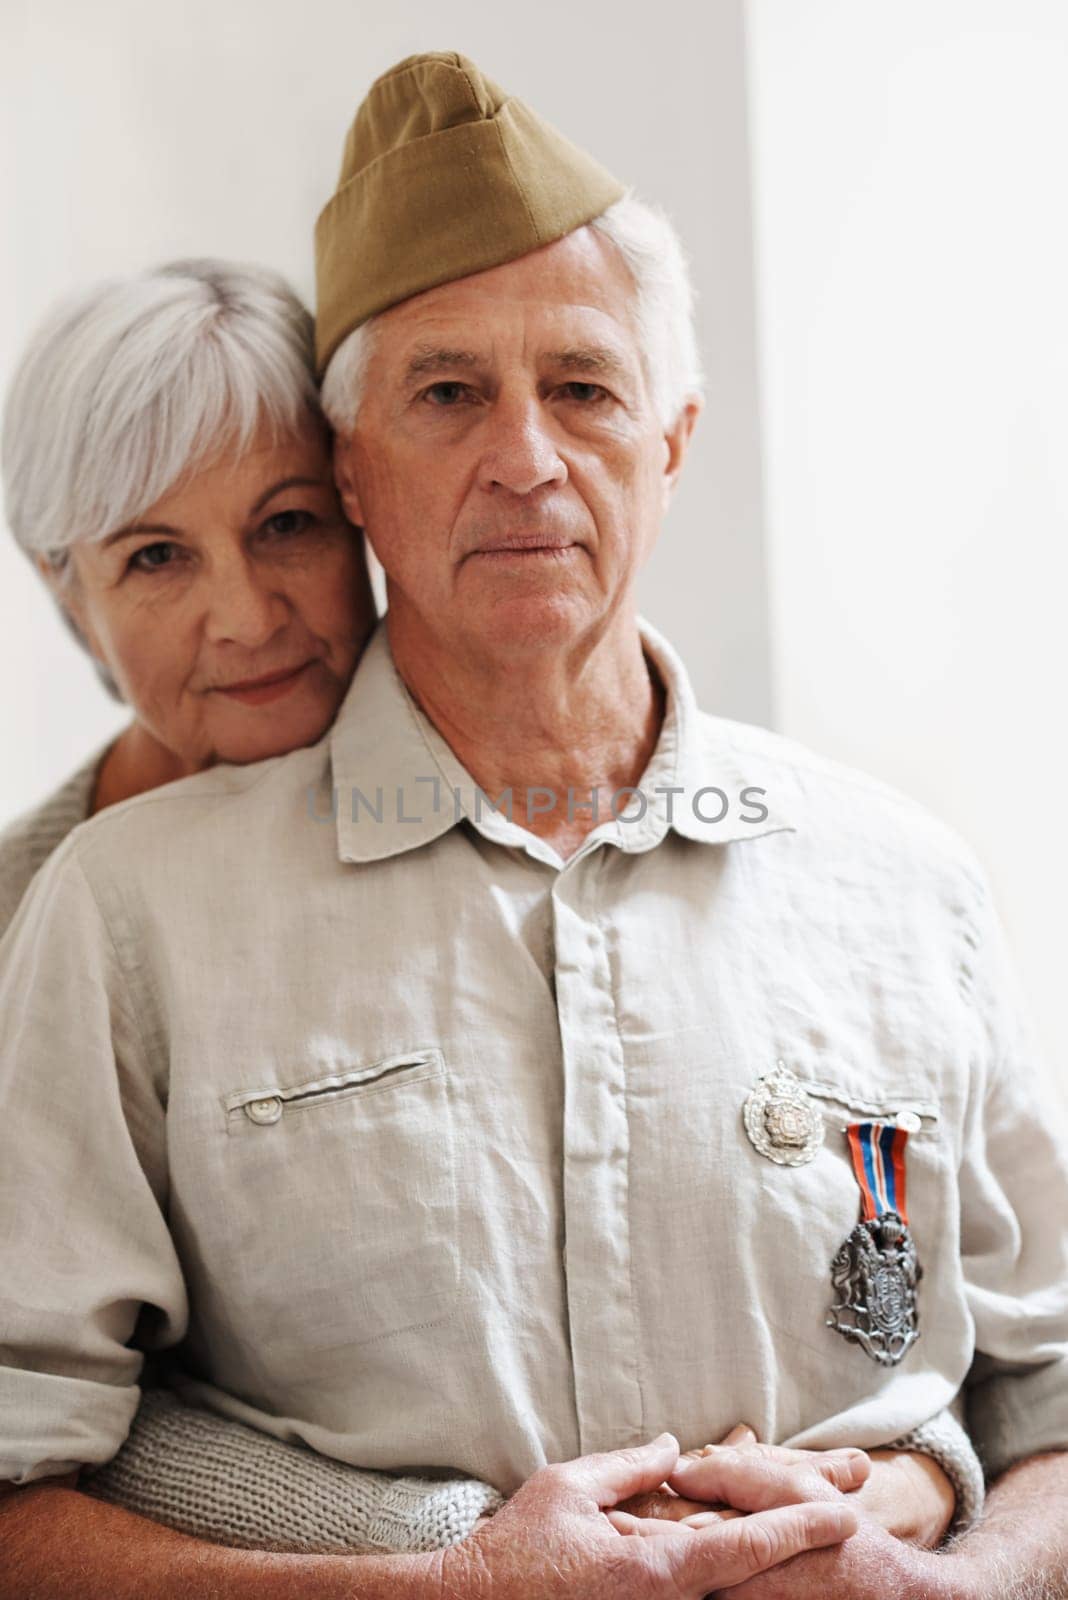 Military, old man and woman with veteran in uniform with medal or pride for memory of battle service. Elderly couple, army or retirement from duty to government with support, care or hug from partner.